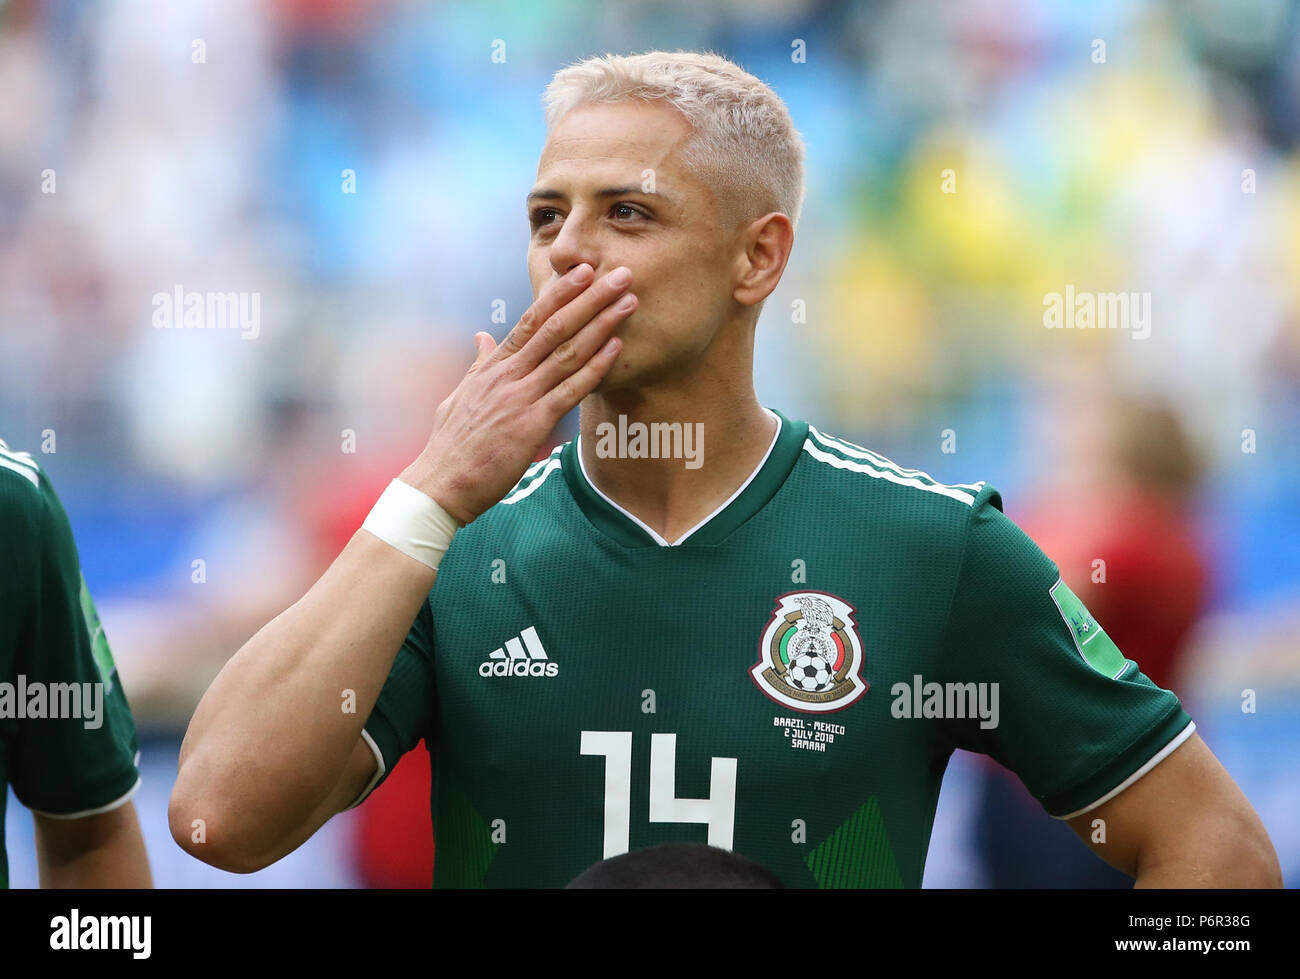 Samara, Russia. 2nd July, 2018. Javier Hernandez of Mexico is seen prior to the 2018 FIFA World Cup round of 16 match between Brazil and Mexico in Samara, Russia, July 2, 2018. Credit: Li Ming/Xinhua/Alamy Live News Stock Photo